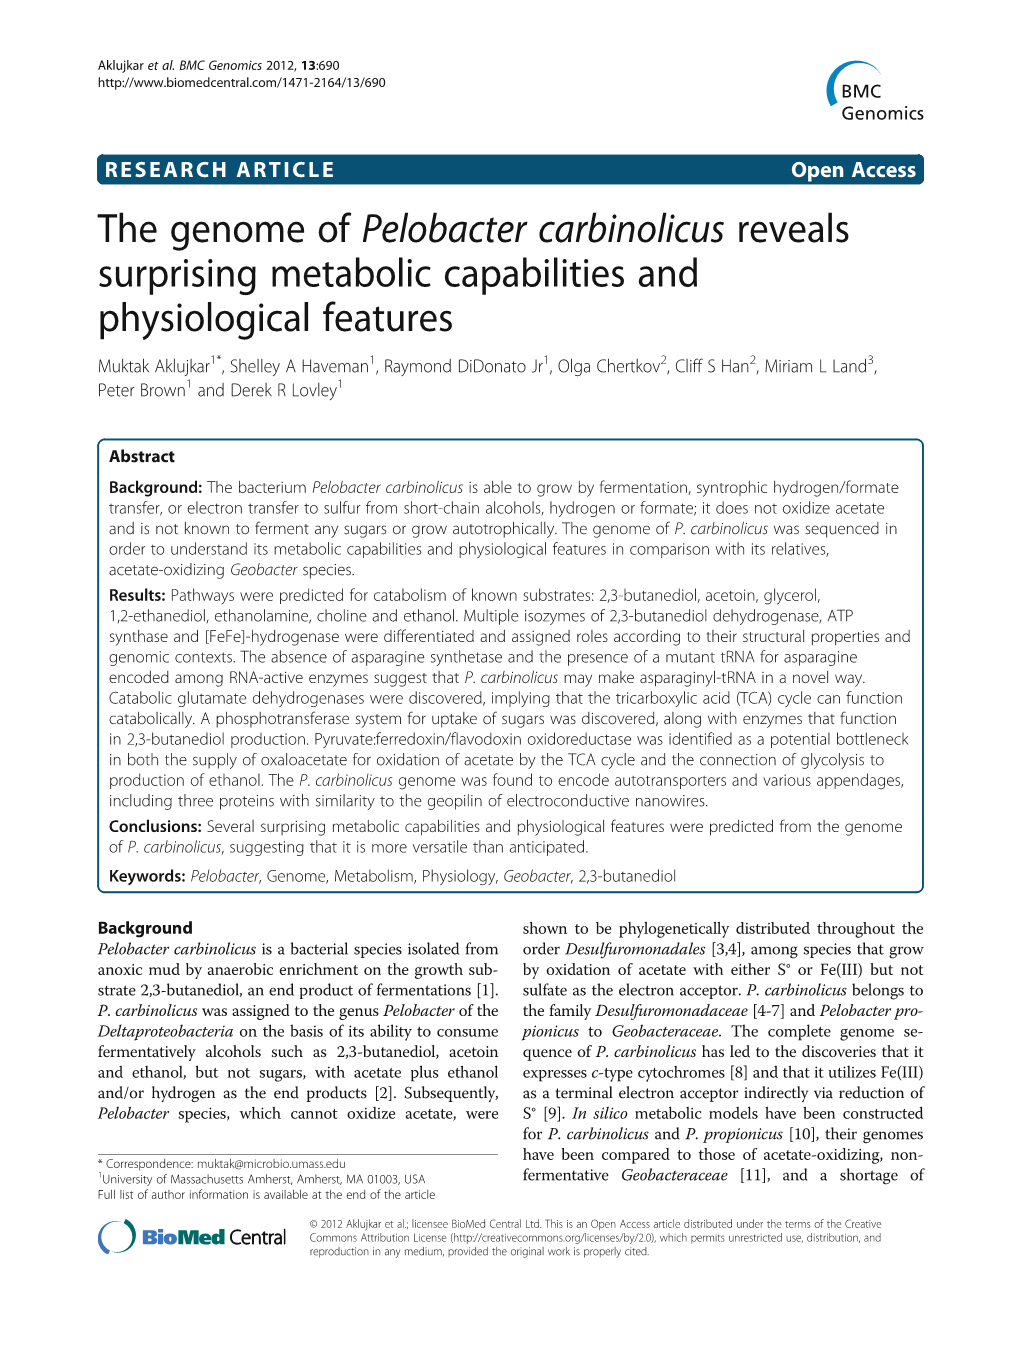 The Genome of Pelobacter Carbinolicus Reveals Surprising Metabolic Capabilities and Physiological Features